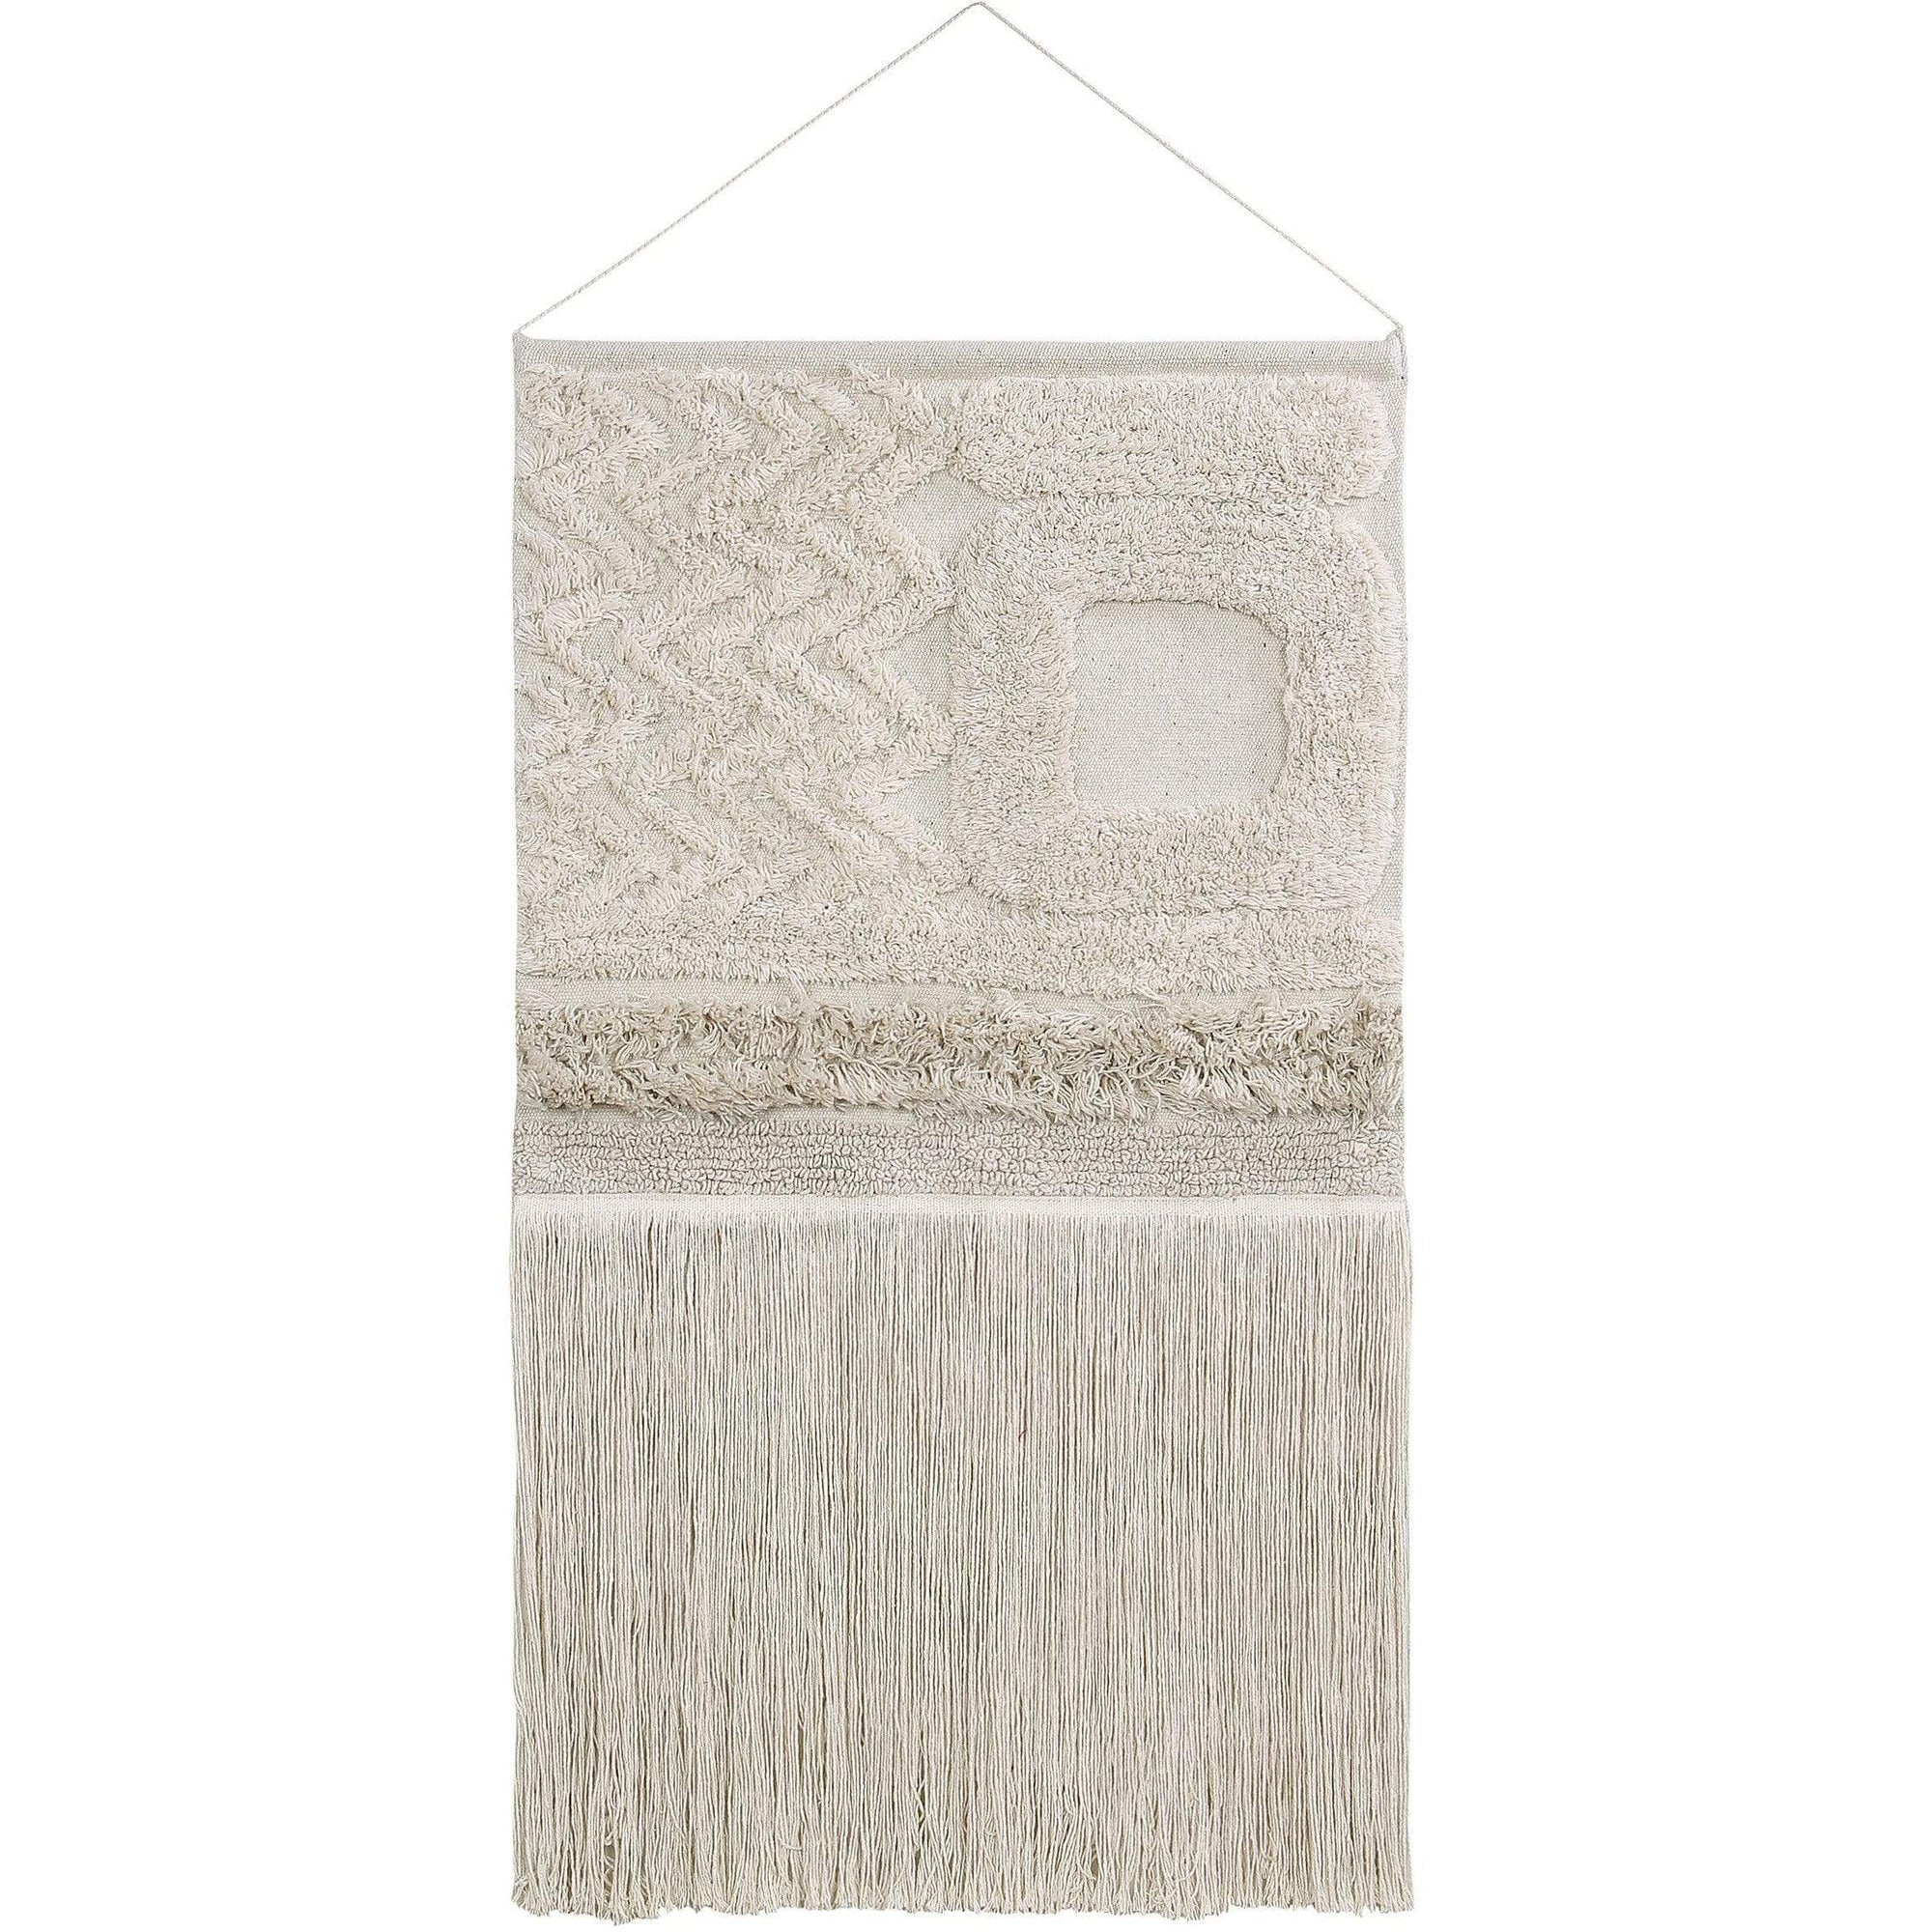 Rugs by Roo | Lorena Canals Earth Dune White Wall Hanging-HANG-EARTH-NAT